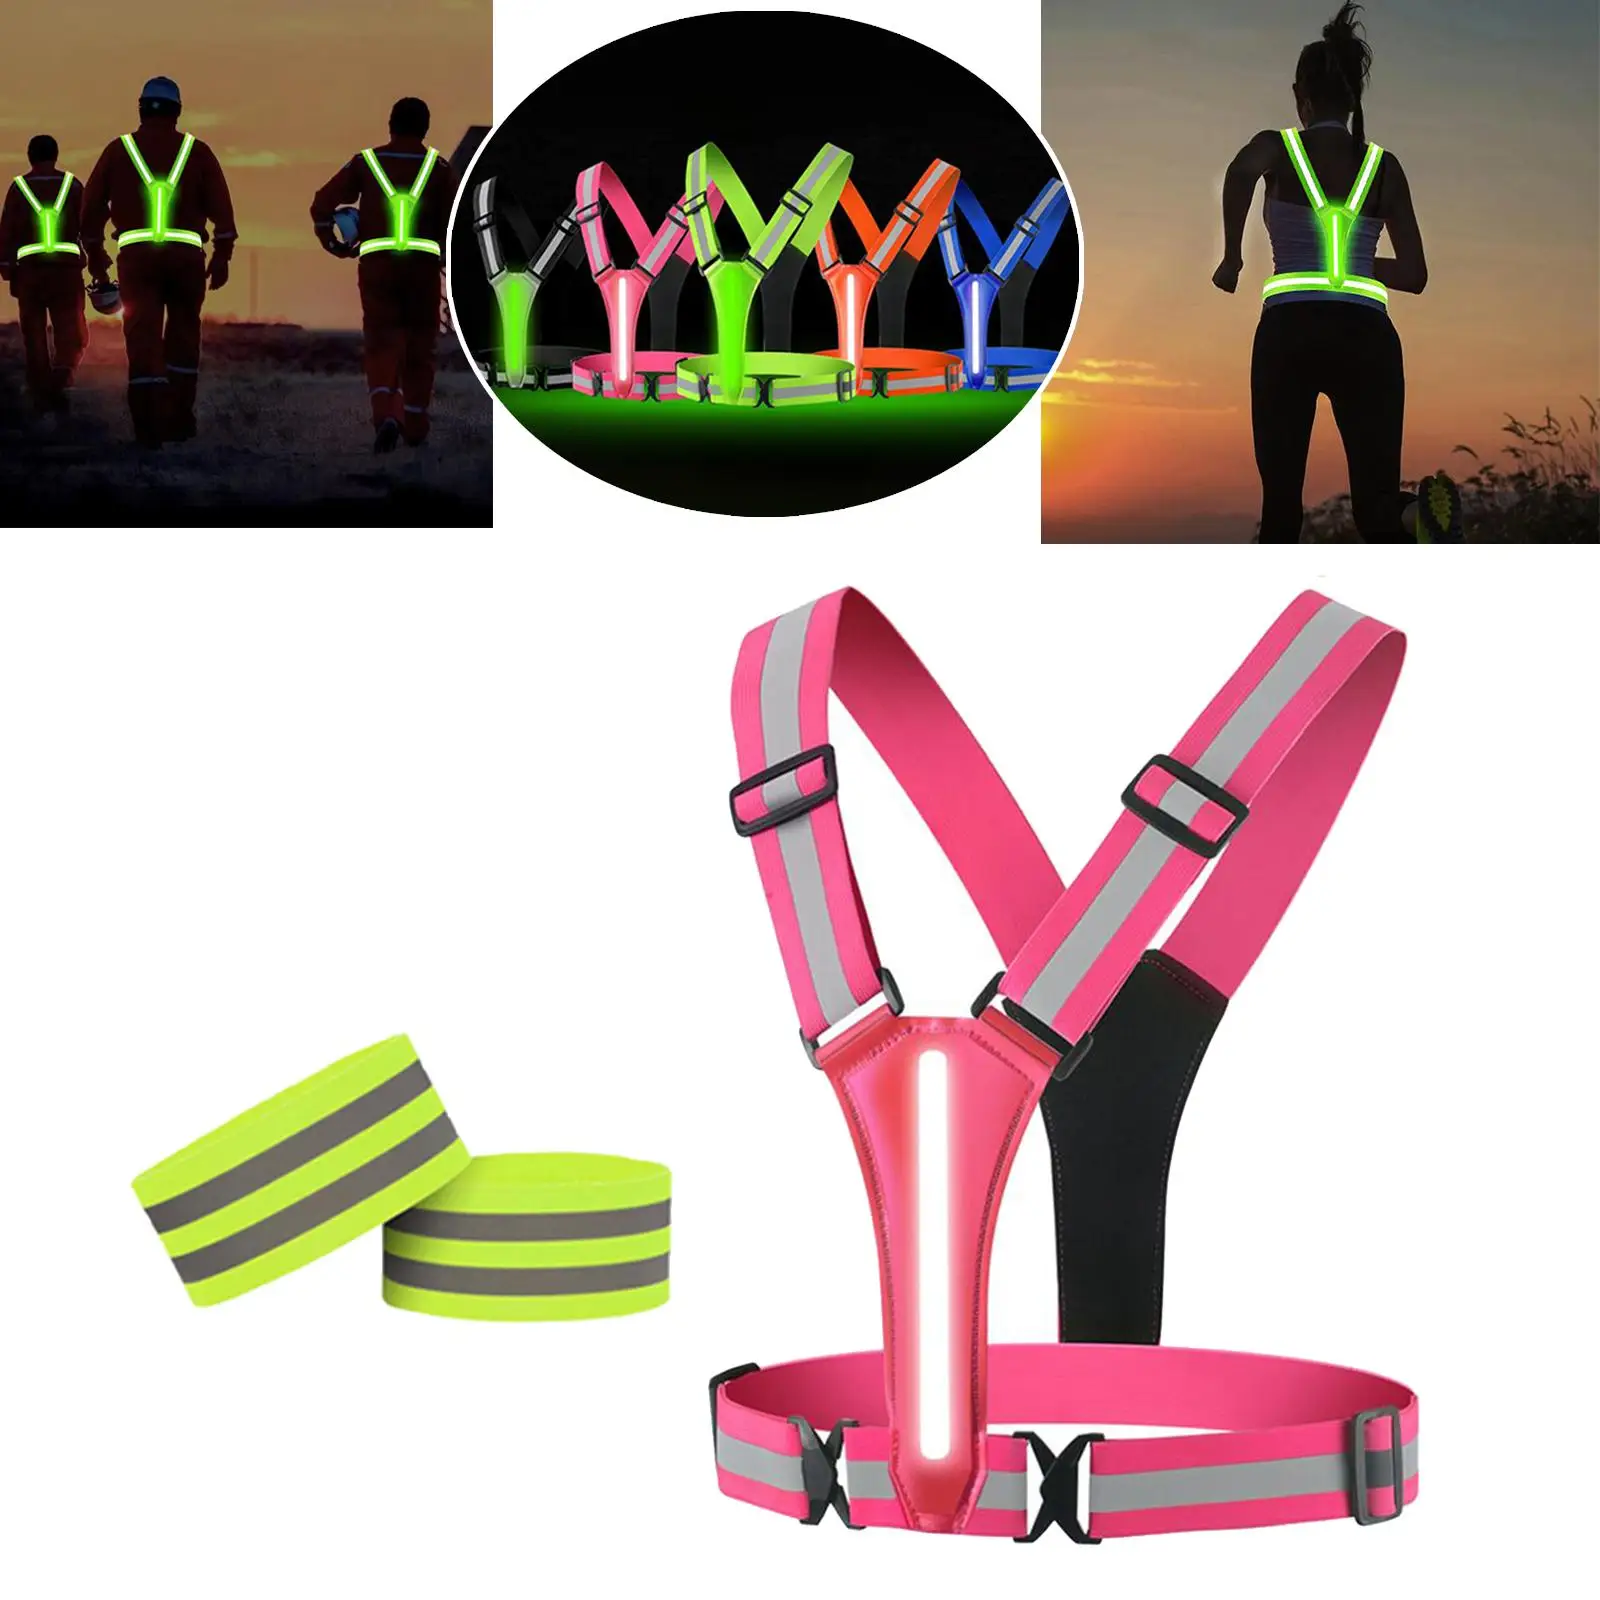 Waterproof LED Reflective Vest Protector with 2 Reflective Arm Straps USB Rechargeable Night Running Gear for Children Worker